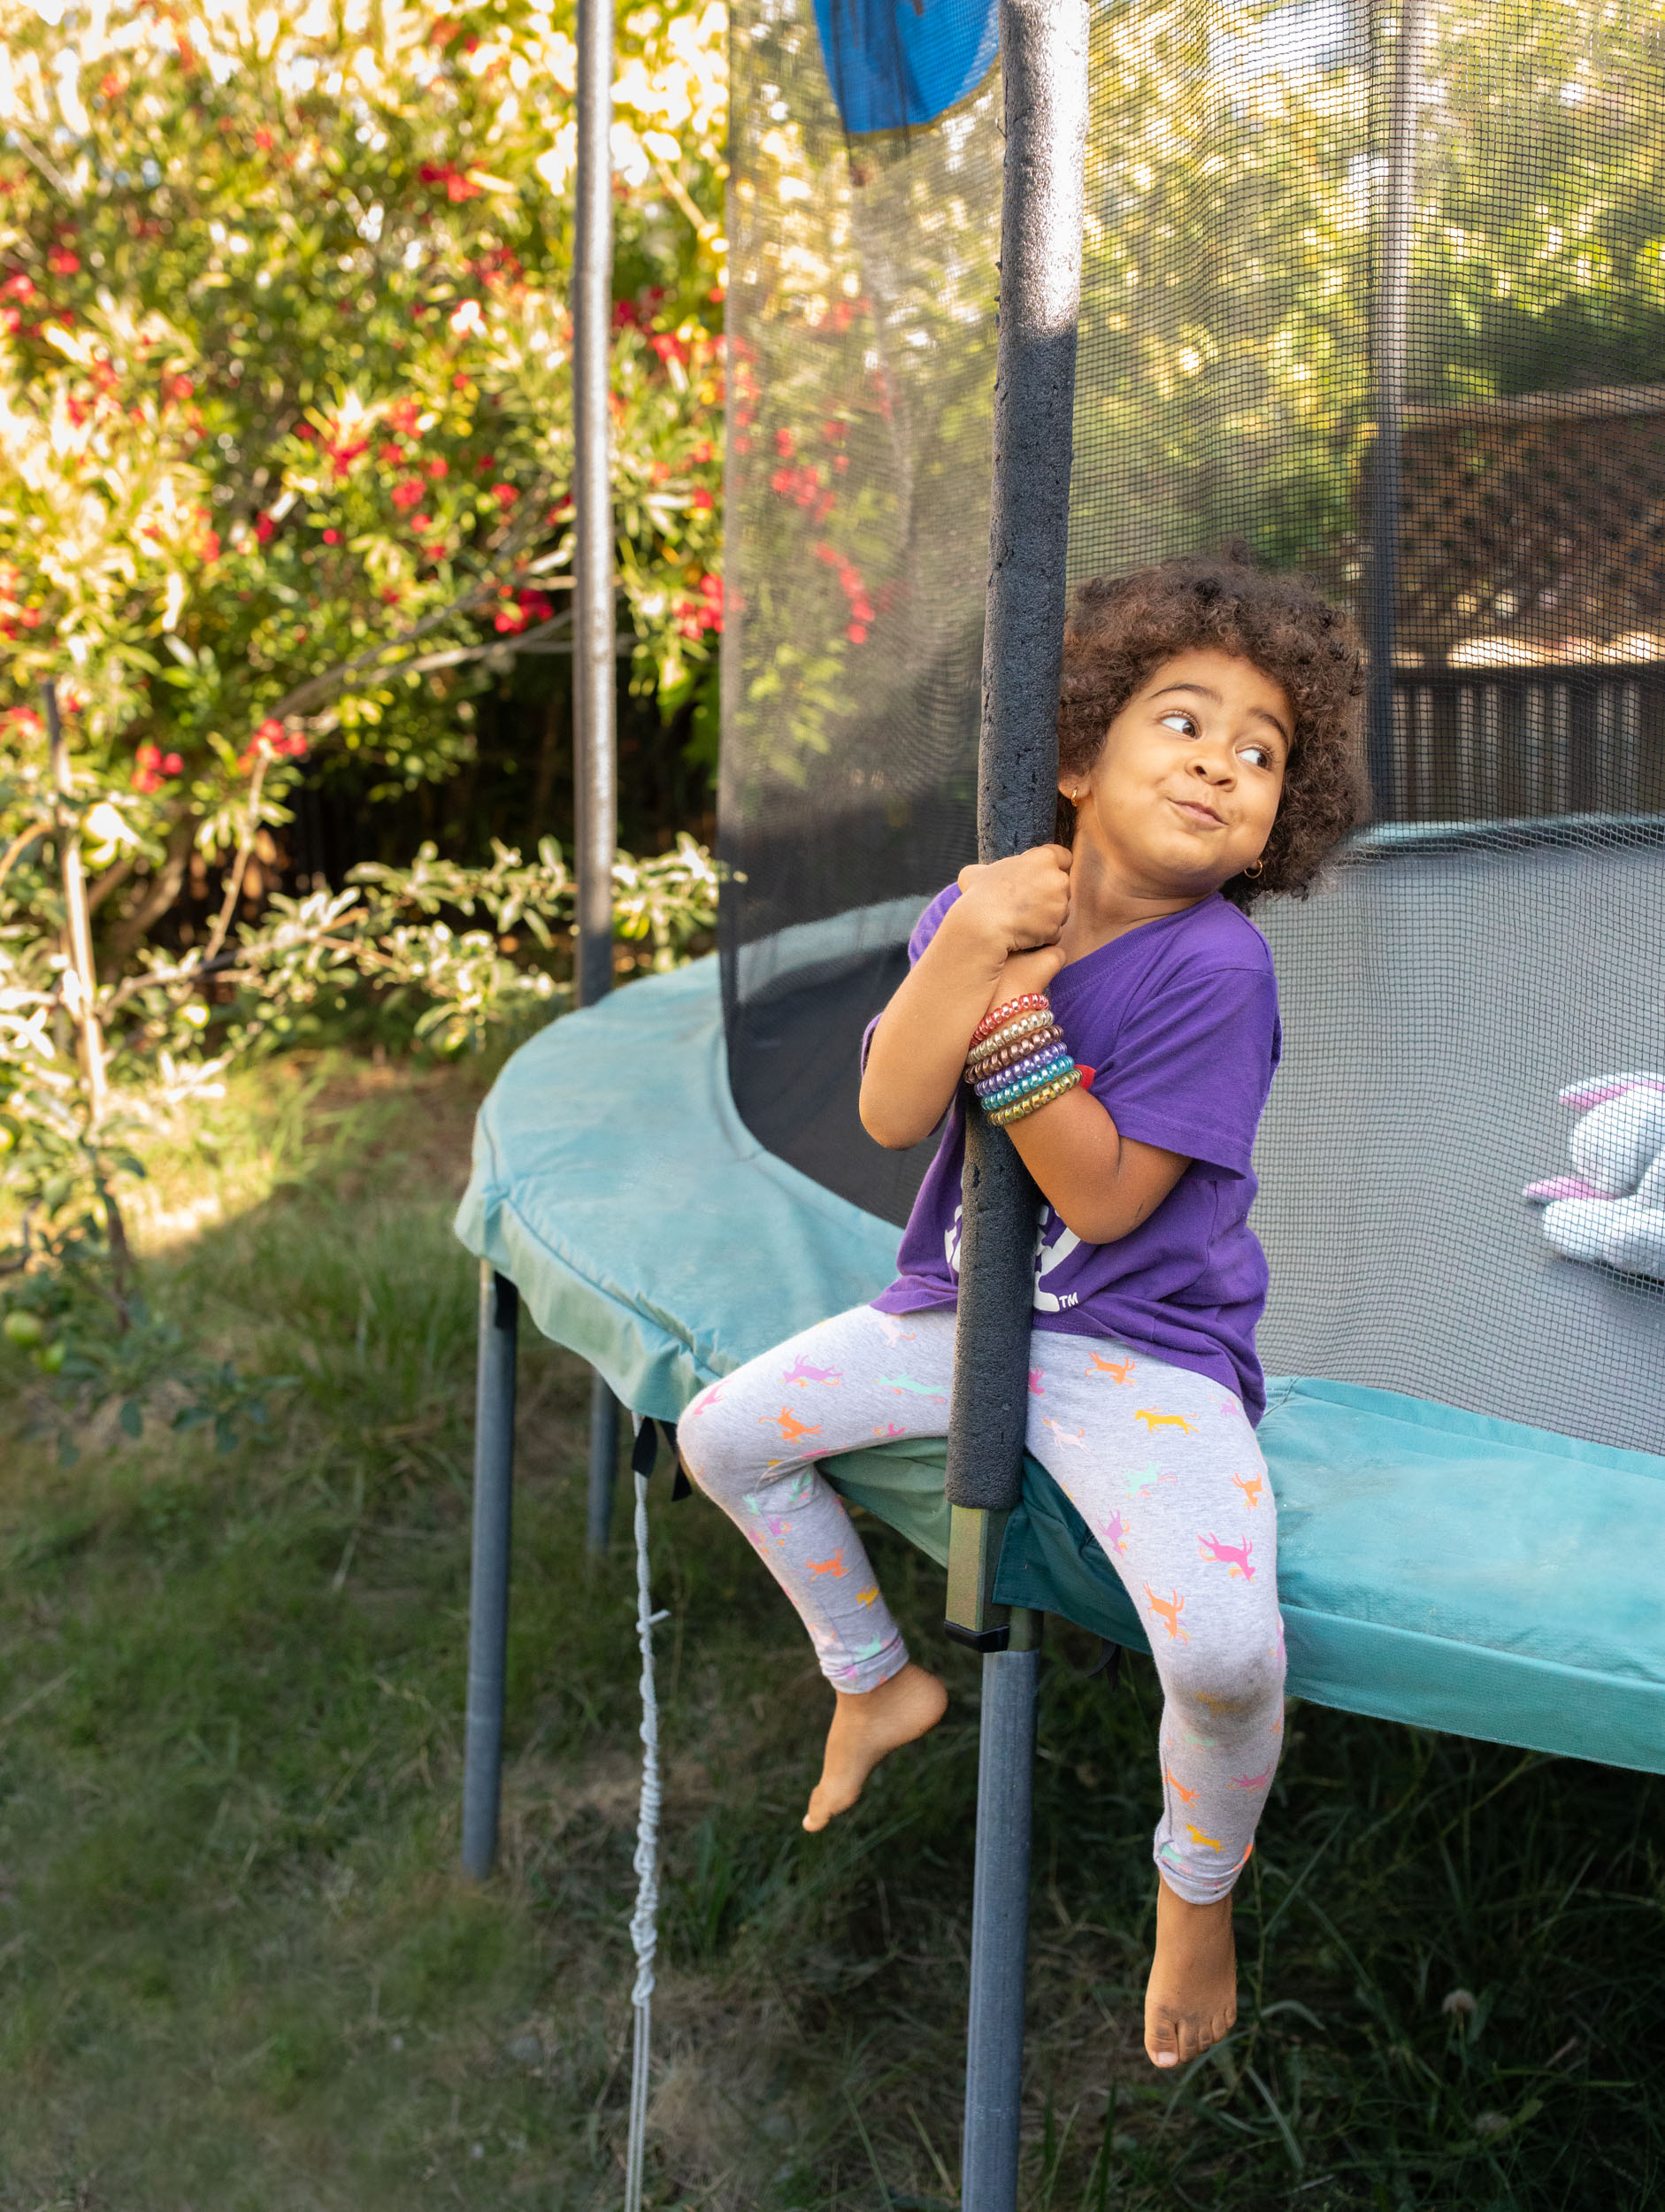 A 6-year-old girl plays on a trampoline at her family